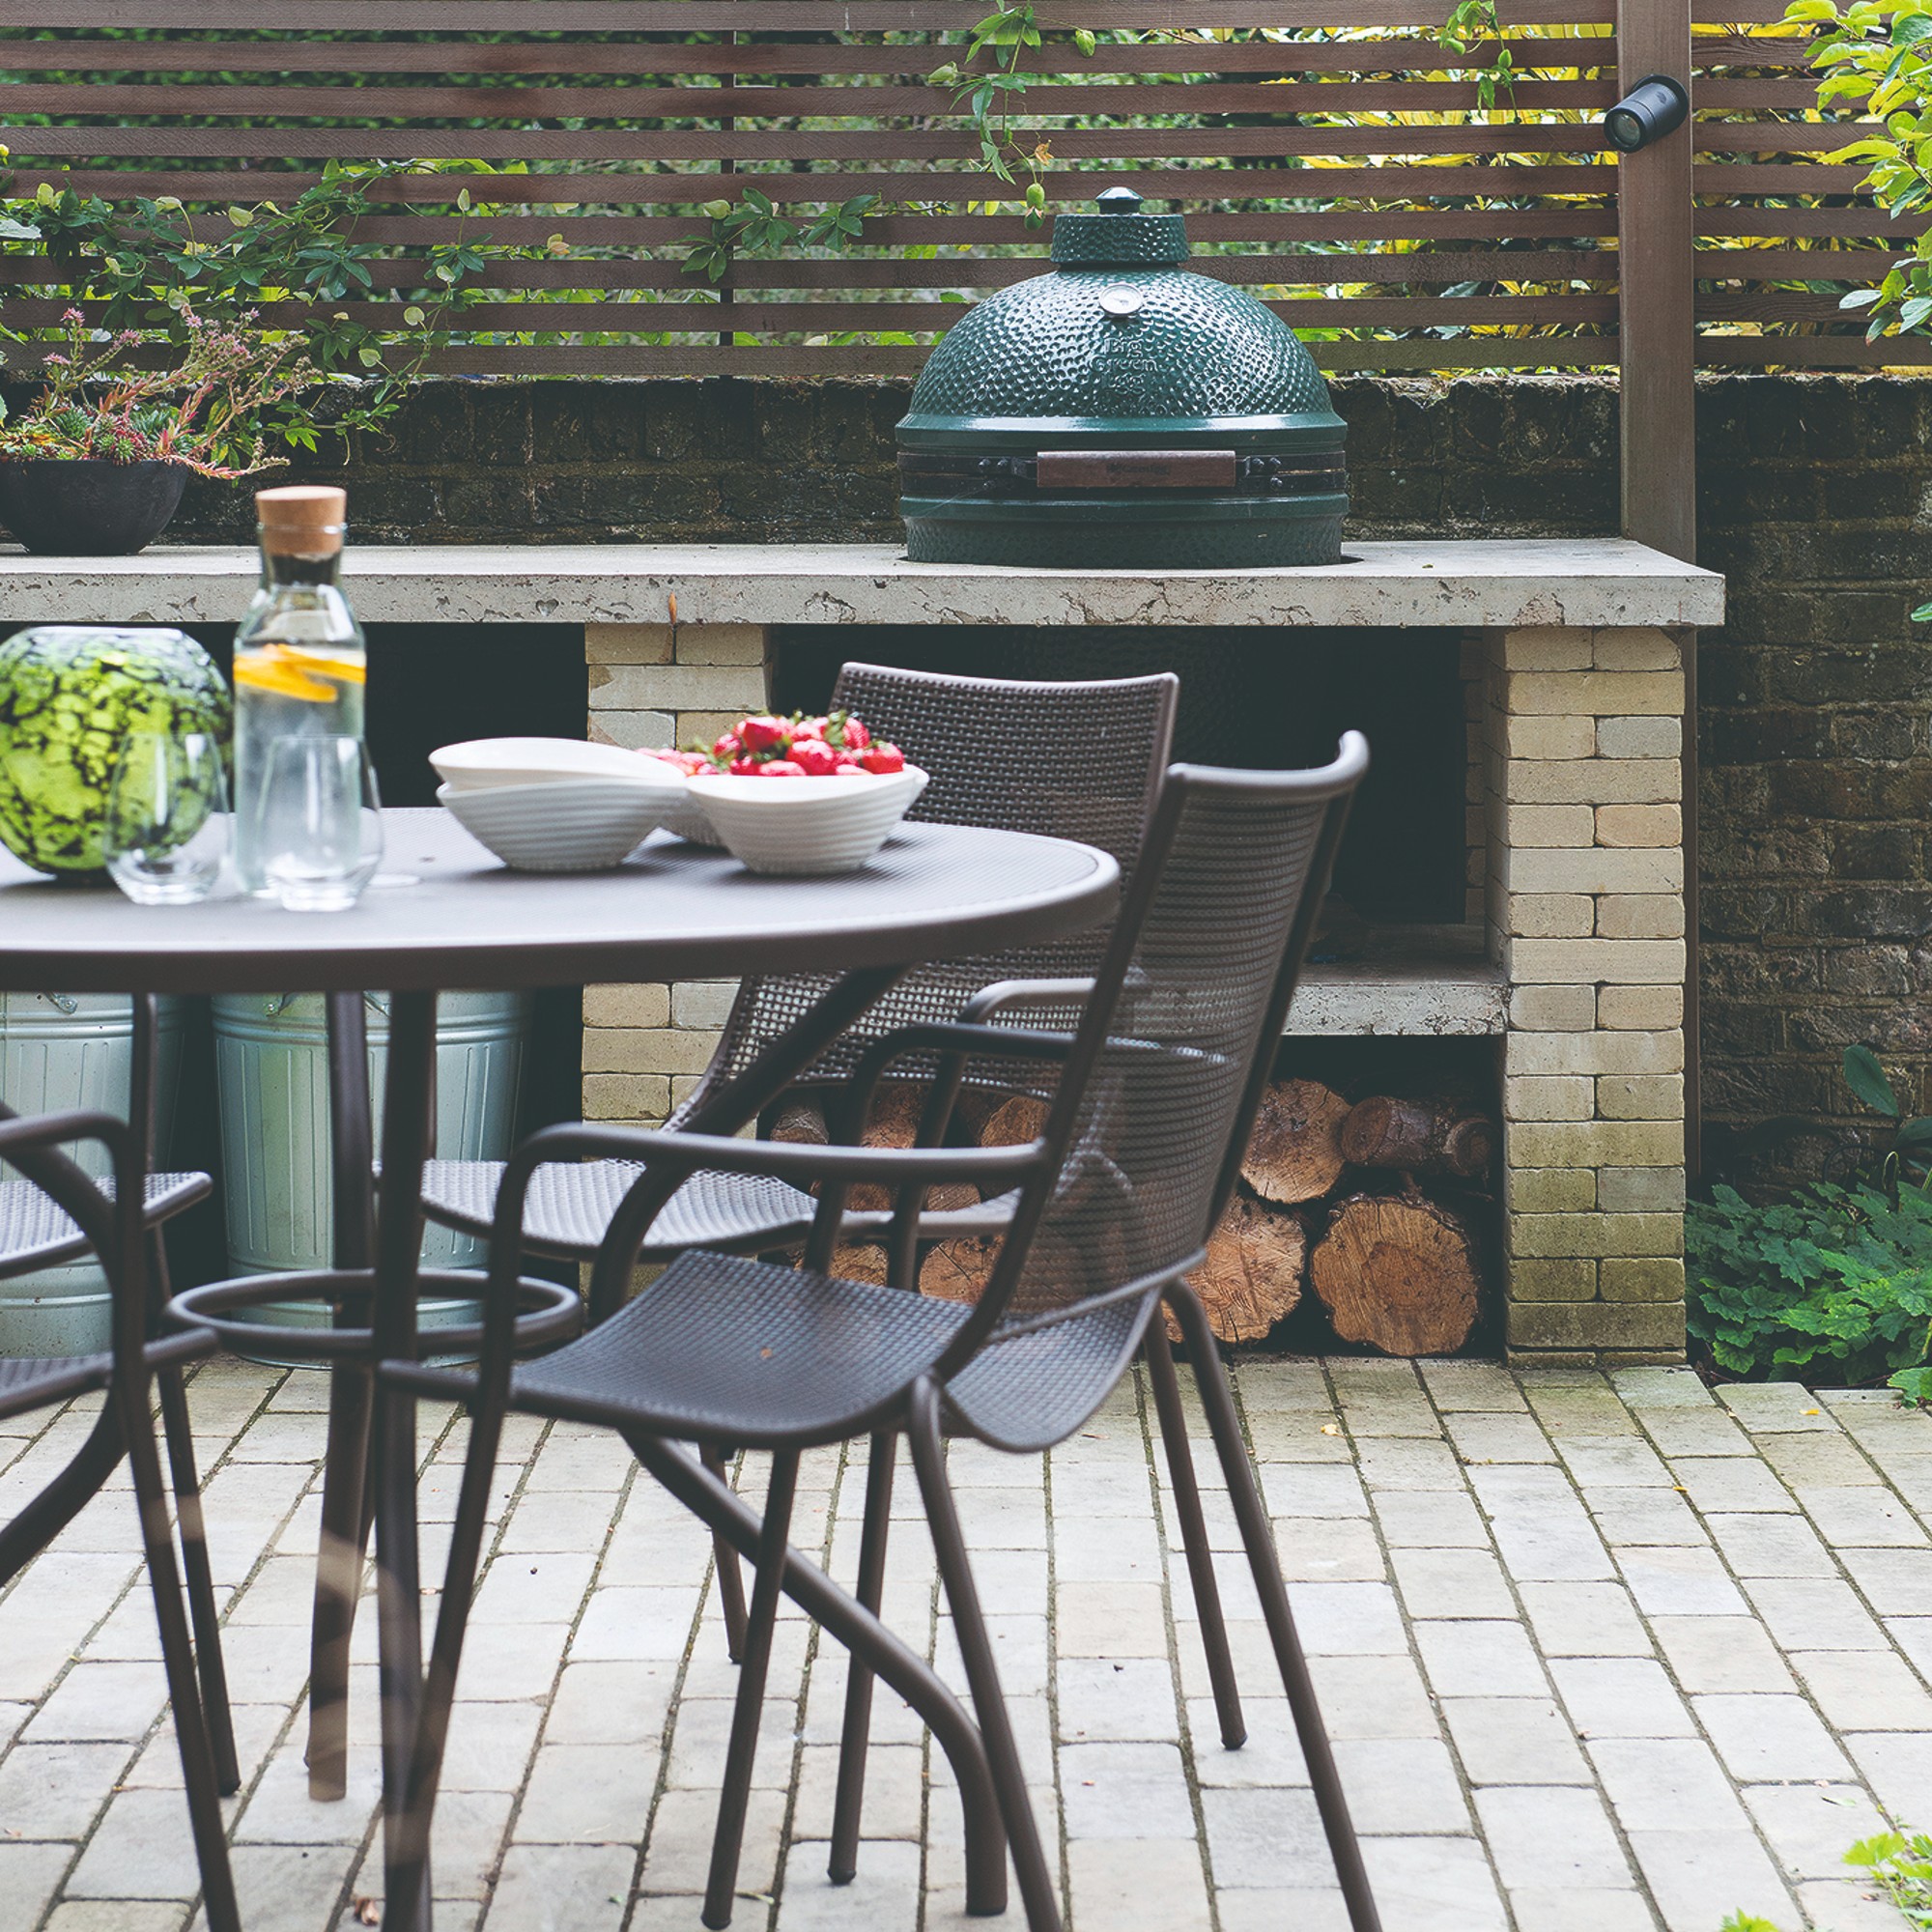 A garden furniture set with an outdoor kitchen in the background